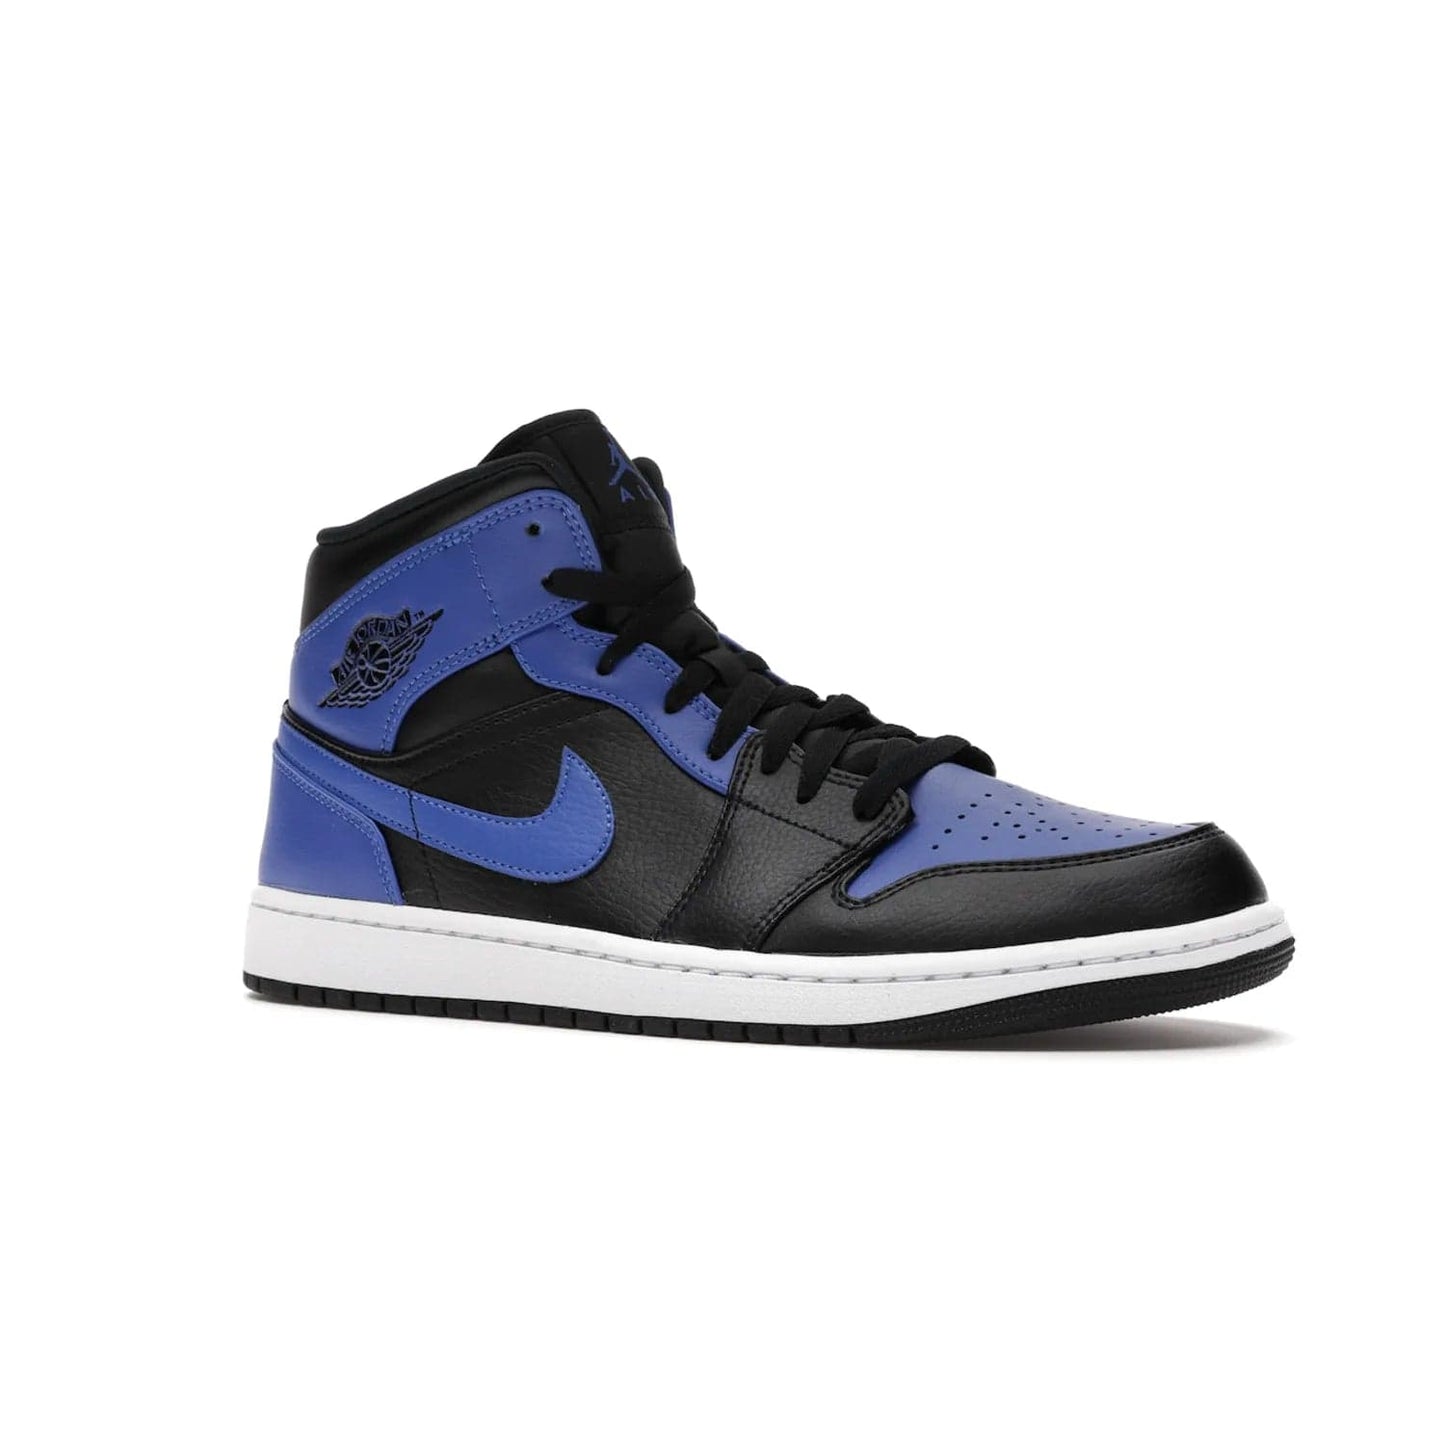 Jordan 1 Mid Hyper Royal Tumbled Leather - Image 4 - Only at www.BallersClubKickz.com - Iconic colorway of the Air Jordan 1 Mid Black Royal Tumbled Leather. Features a black tumbled leather upper, royal blue leather overlays, white midsole & black rubber outsole. Released December 2020. Adds premium style to any collection.